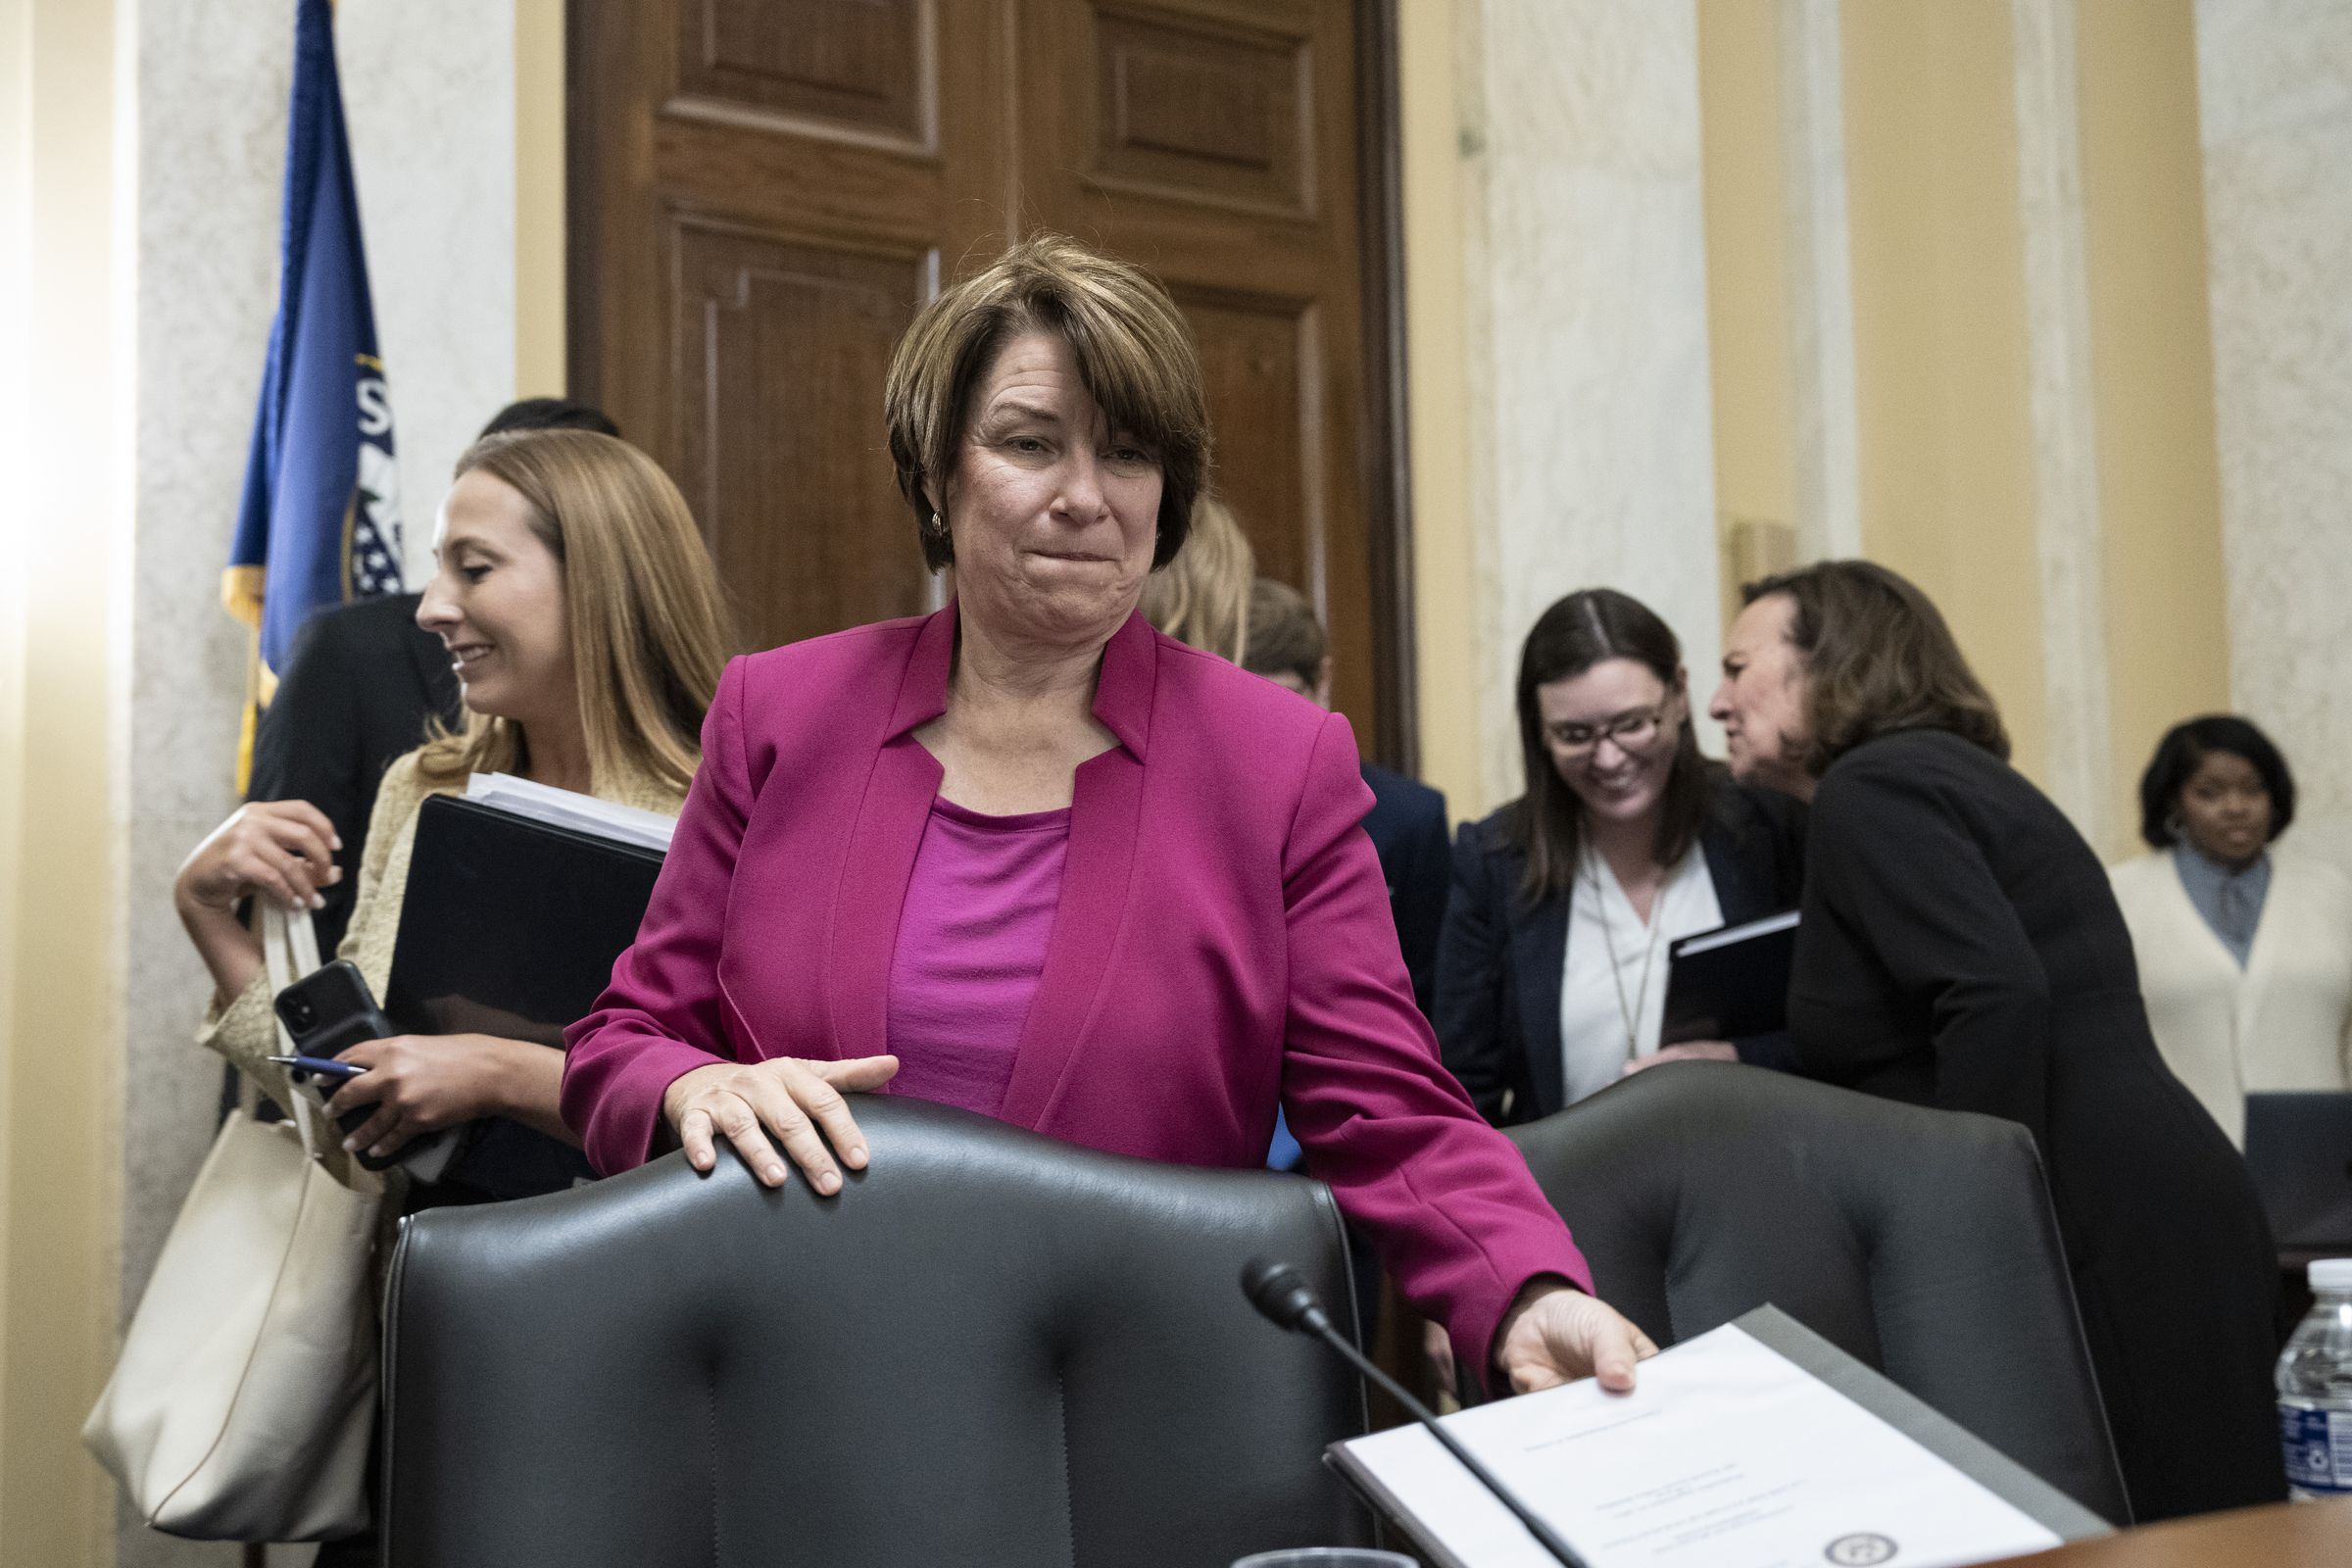 Sen. Amy Klobuchar (D-MN) attends Senate Rules And Administration Holds Hearing On AI And Elections